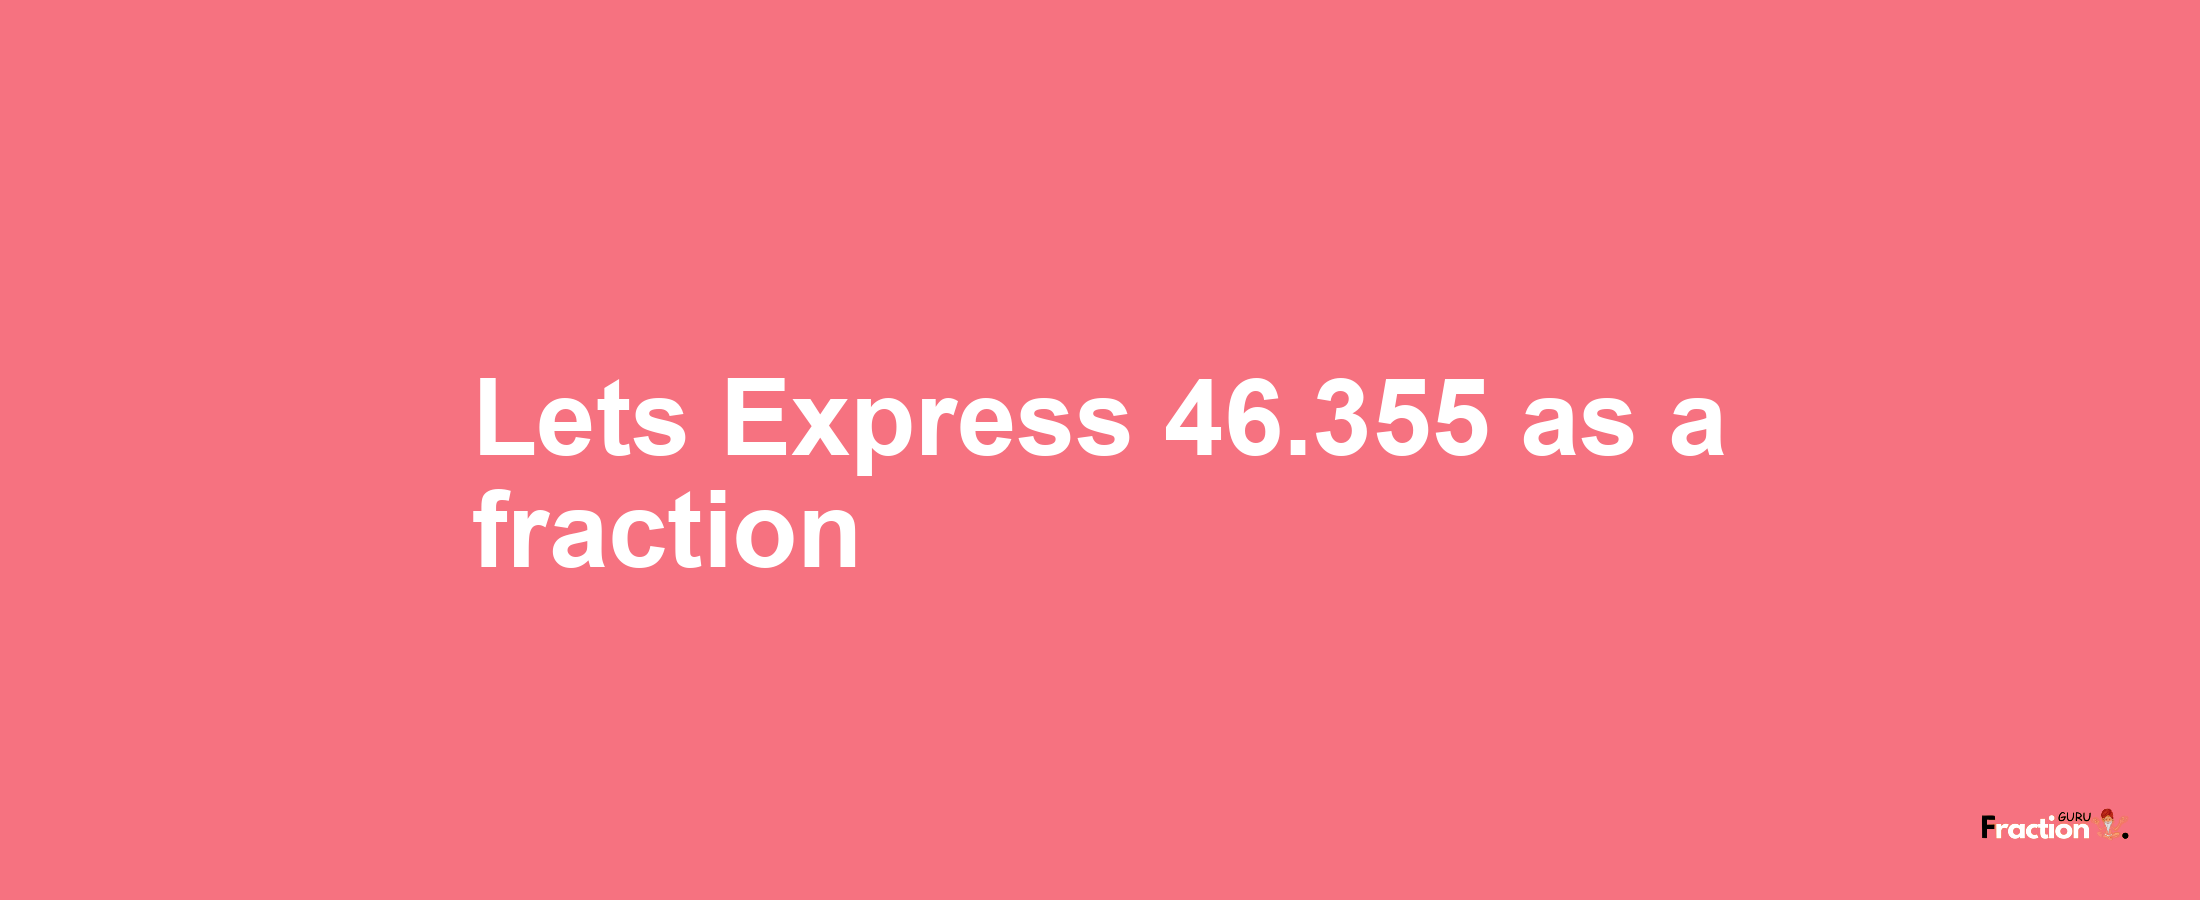 Lets Express 46.355 as afraction